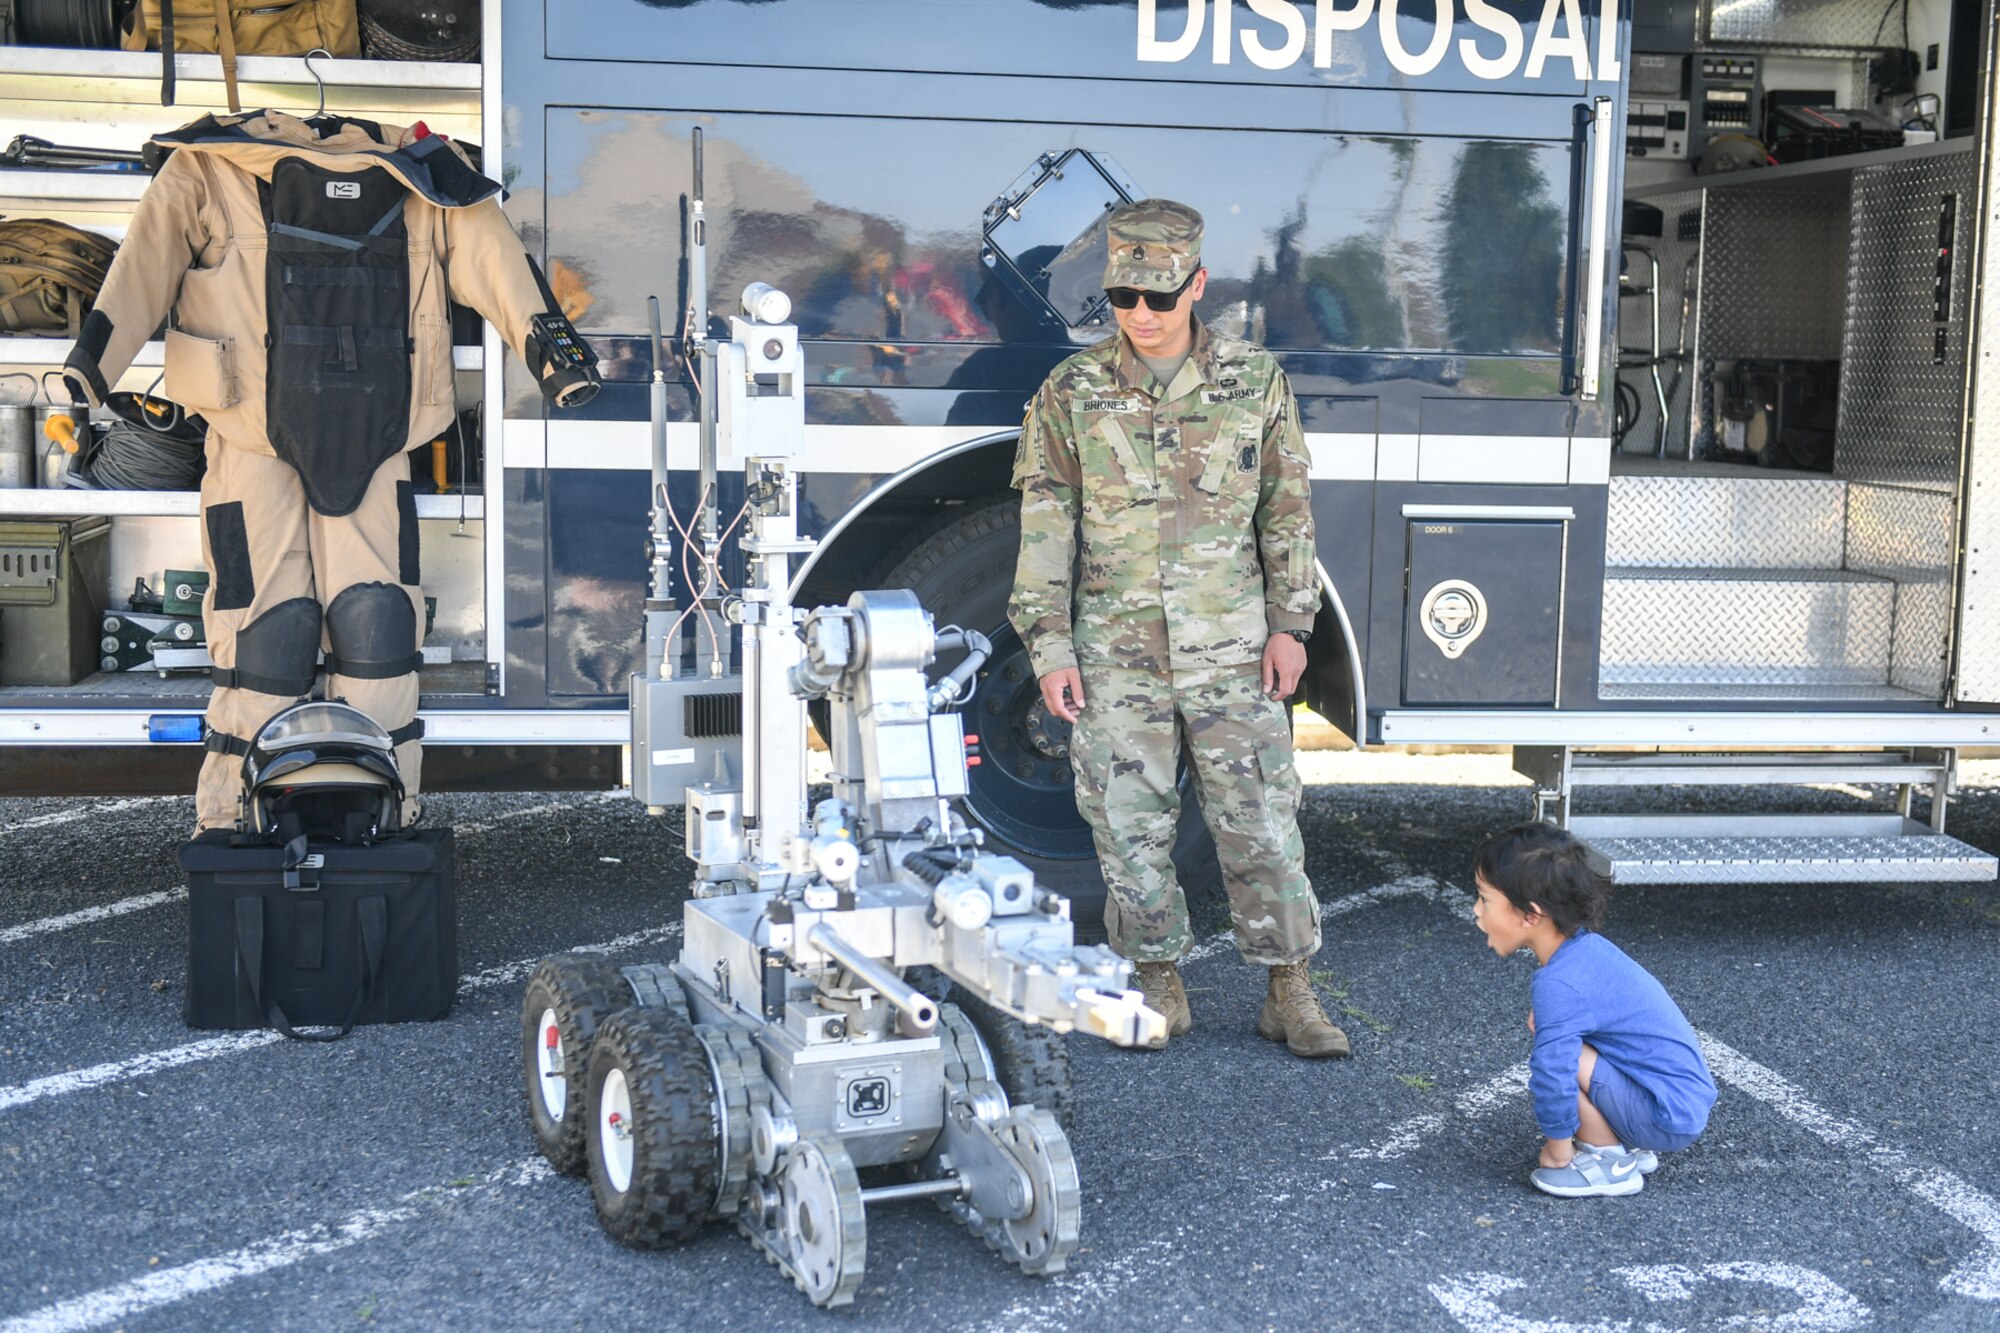 Staff Sgt. Manuel Briones, Army recruiting, and his son Julian examine an Explosive Ordnance Disposal robot from the 775th EOD Flight during Wheels of Wonder June 8, 2018, at Hill Air Force Base, Utah. Wheels of Wonder provides base families a fun, hands-on experience exploring various types of vehicles. (U.S. Air Force photo by Cynthia Griggs)